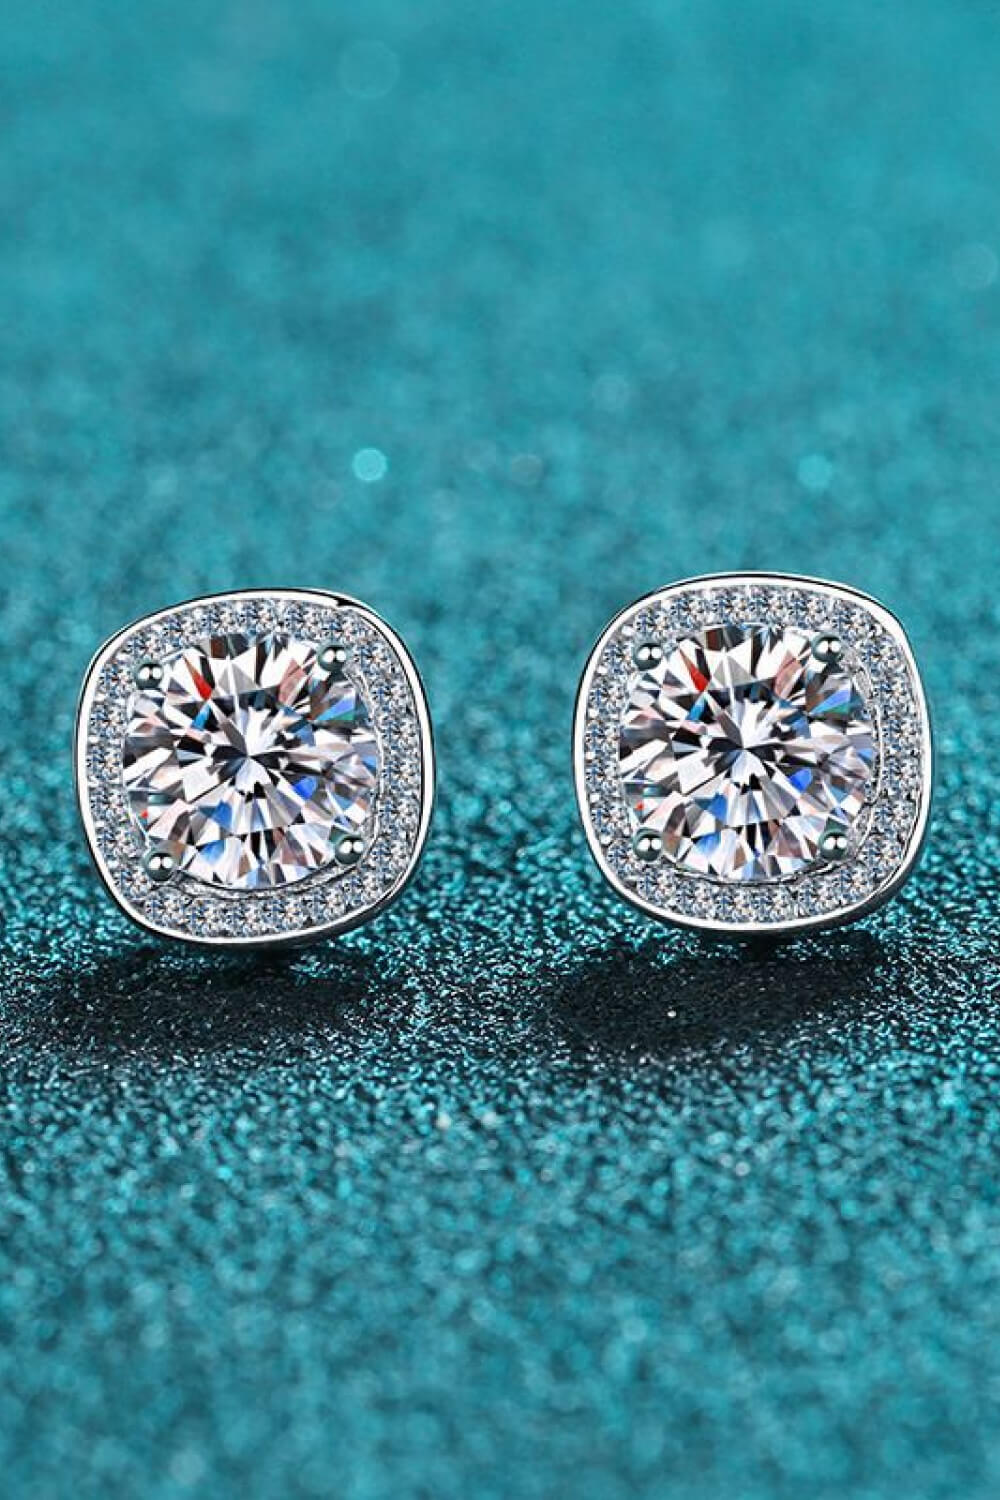 Let Me Love You 1 Carat Moissanite Stud Earrings - Cheeky Chic Boutique